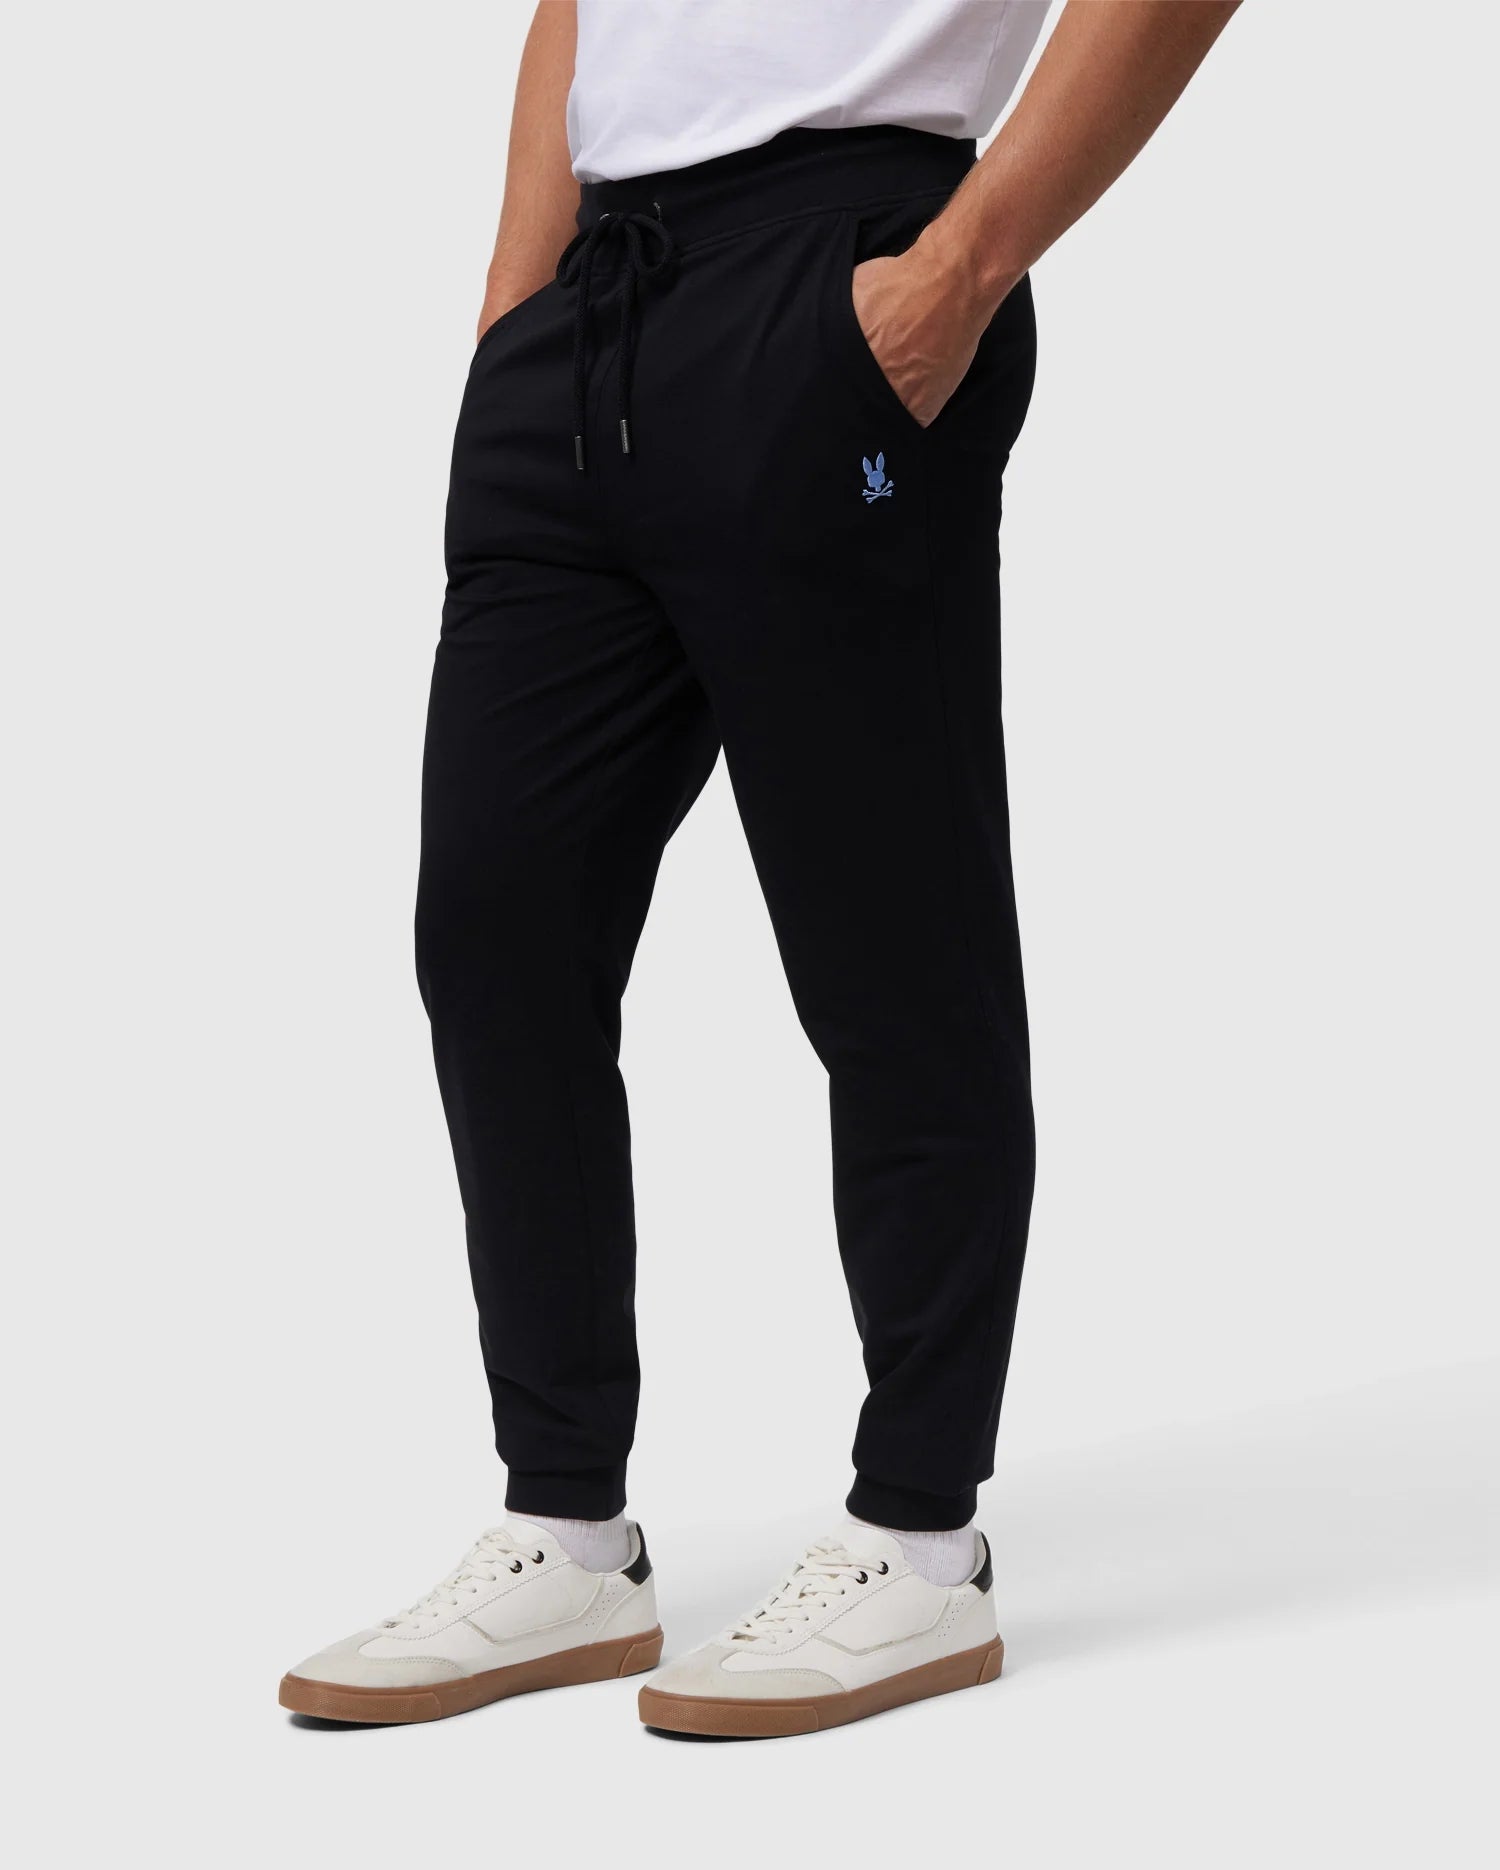 Men's Straight Sweatpants  Men's Up to 50% Off Select Styles